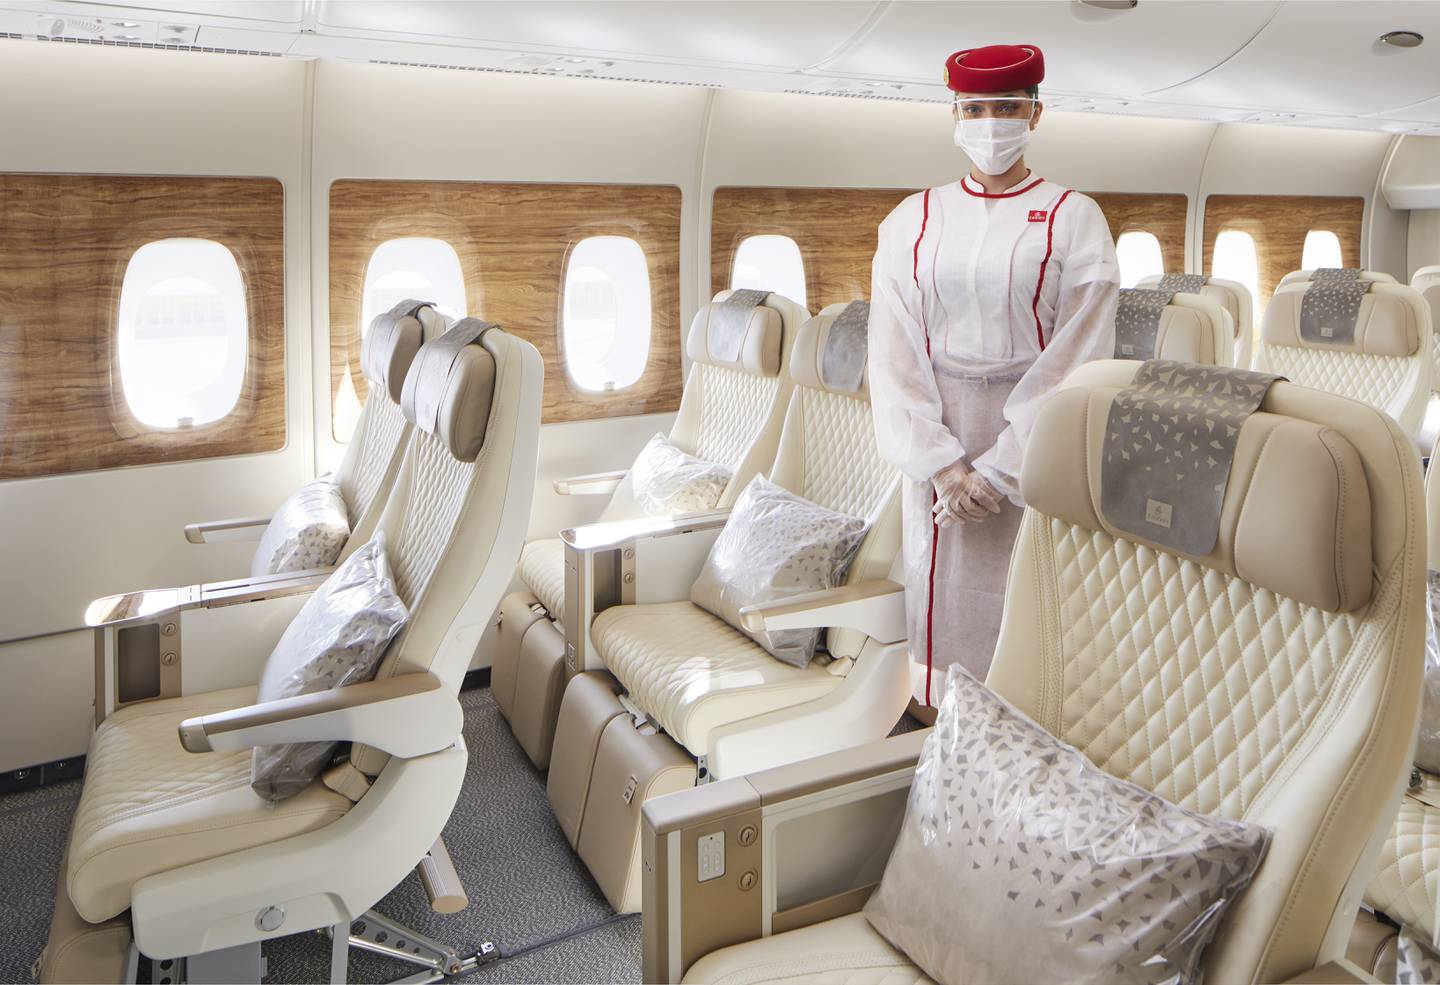 Emirates' first Premium Economy cabin on the airline's brand-new A380 superjumbo will be deployed to London Heathrow for its first destination. Courtesy Emirates